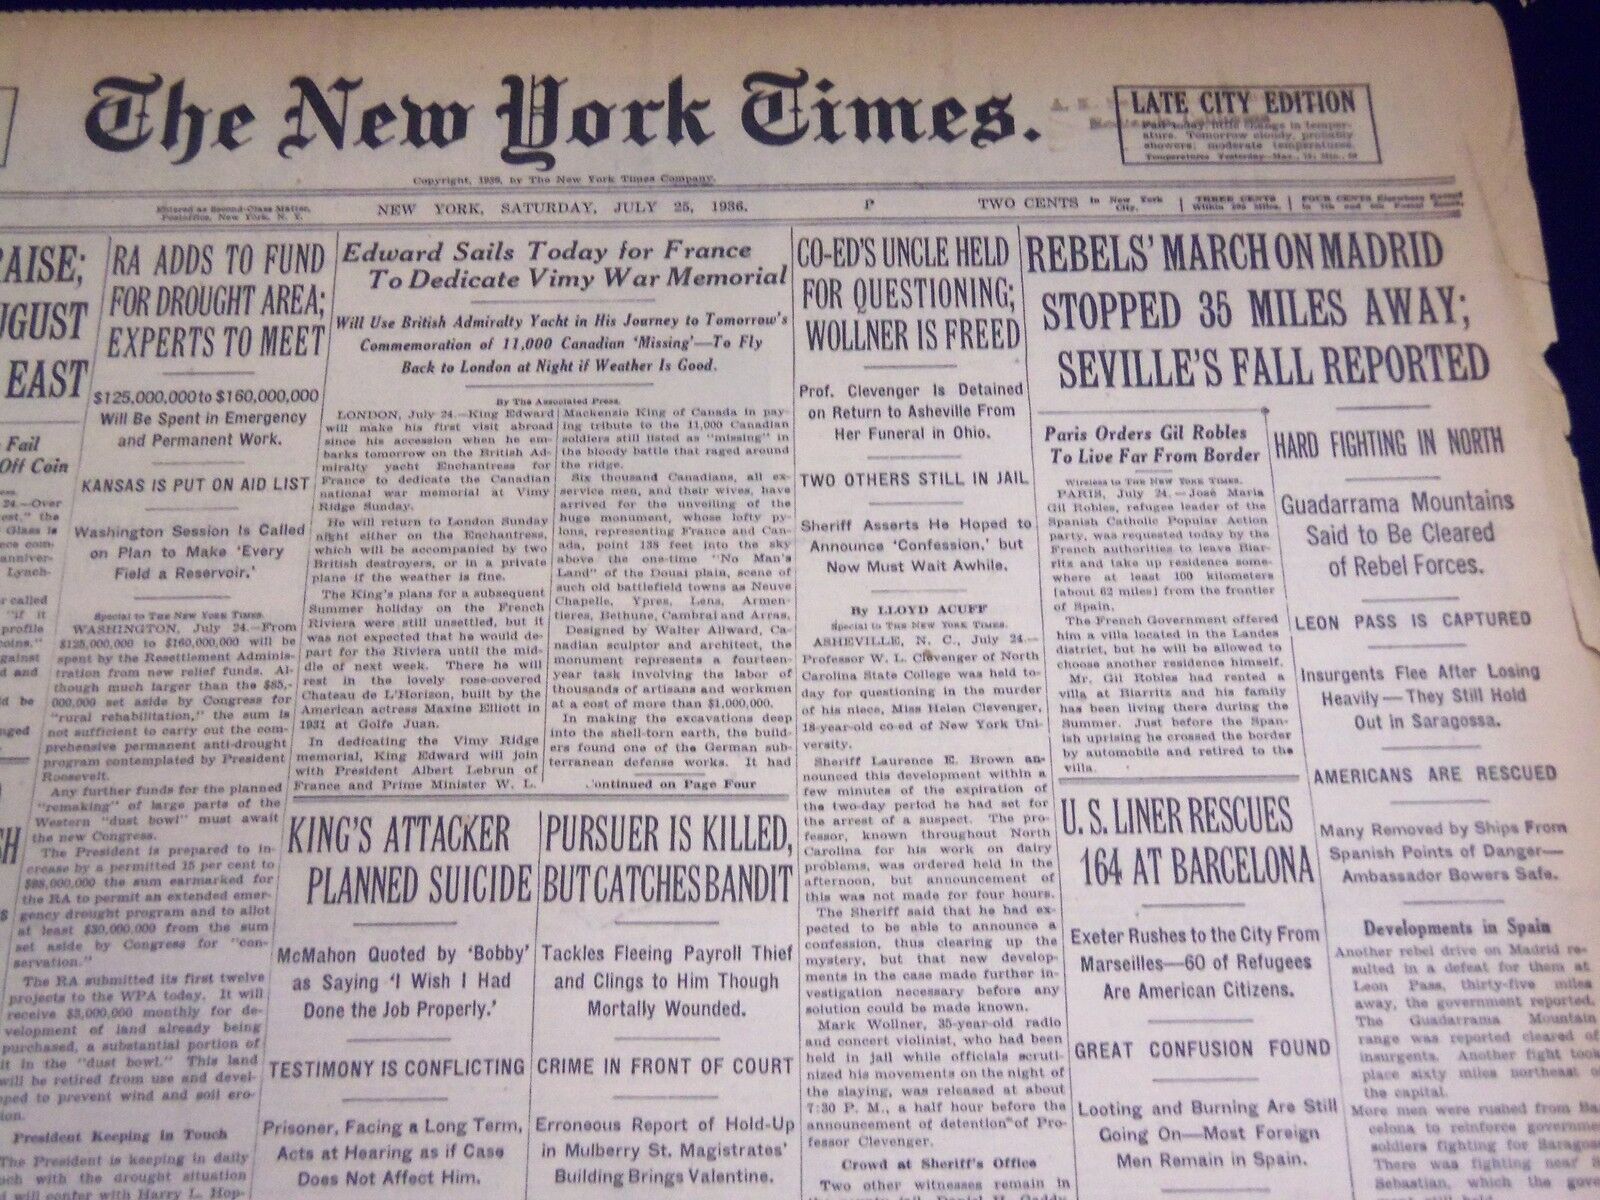 1936 JULY 25 NEW YORK TIMES - REBELS MARCH ON MADRID - NT 4047